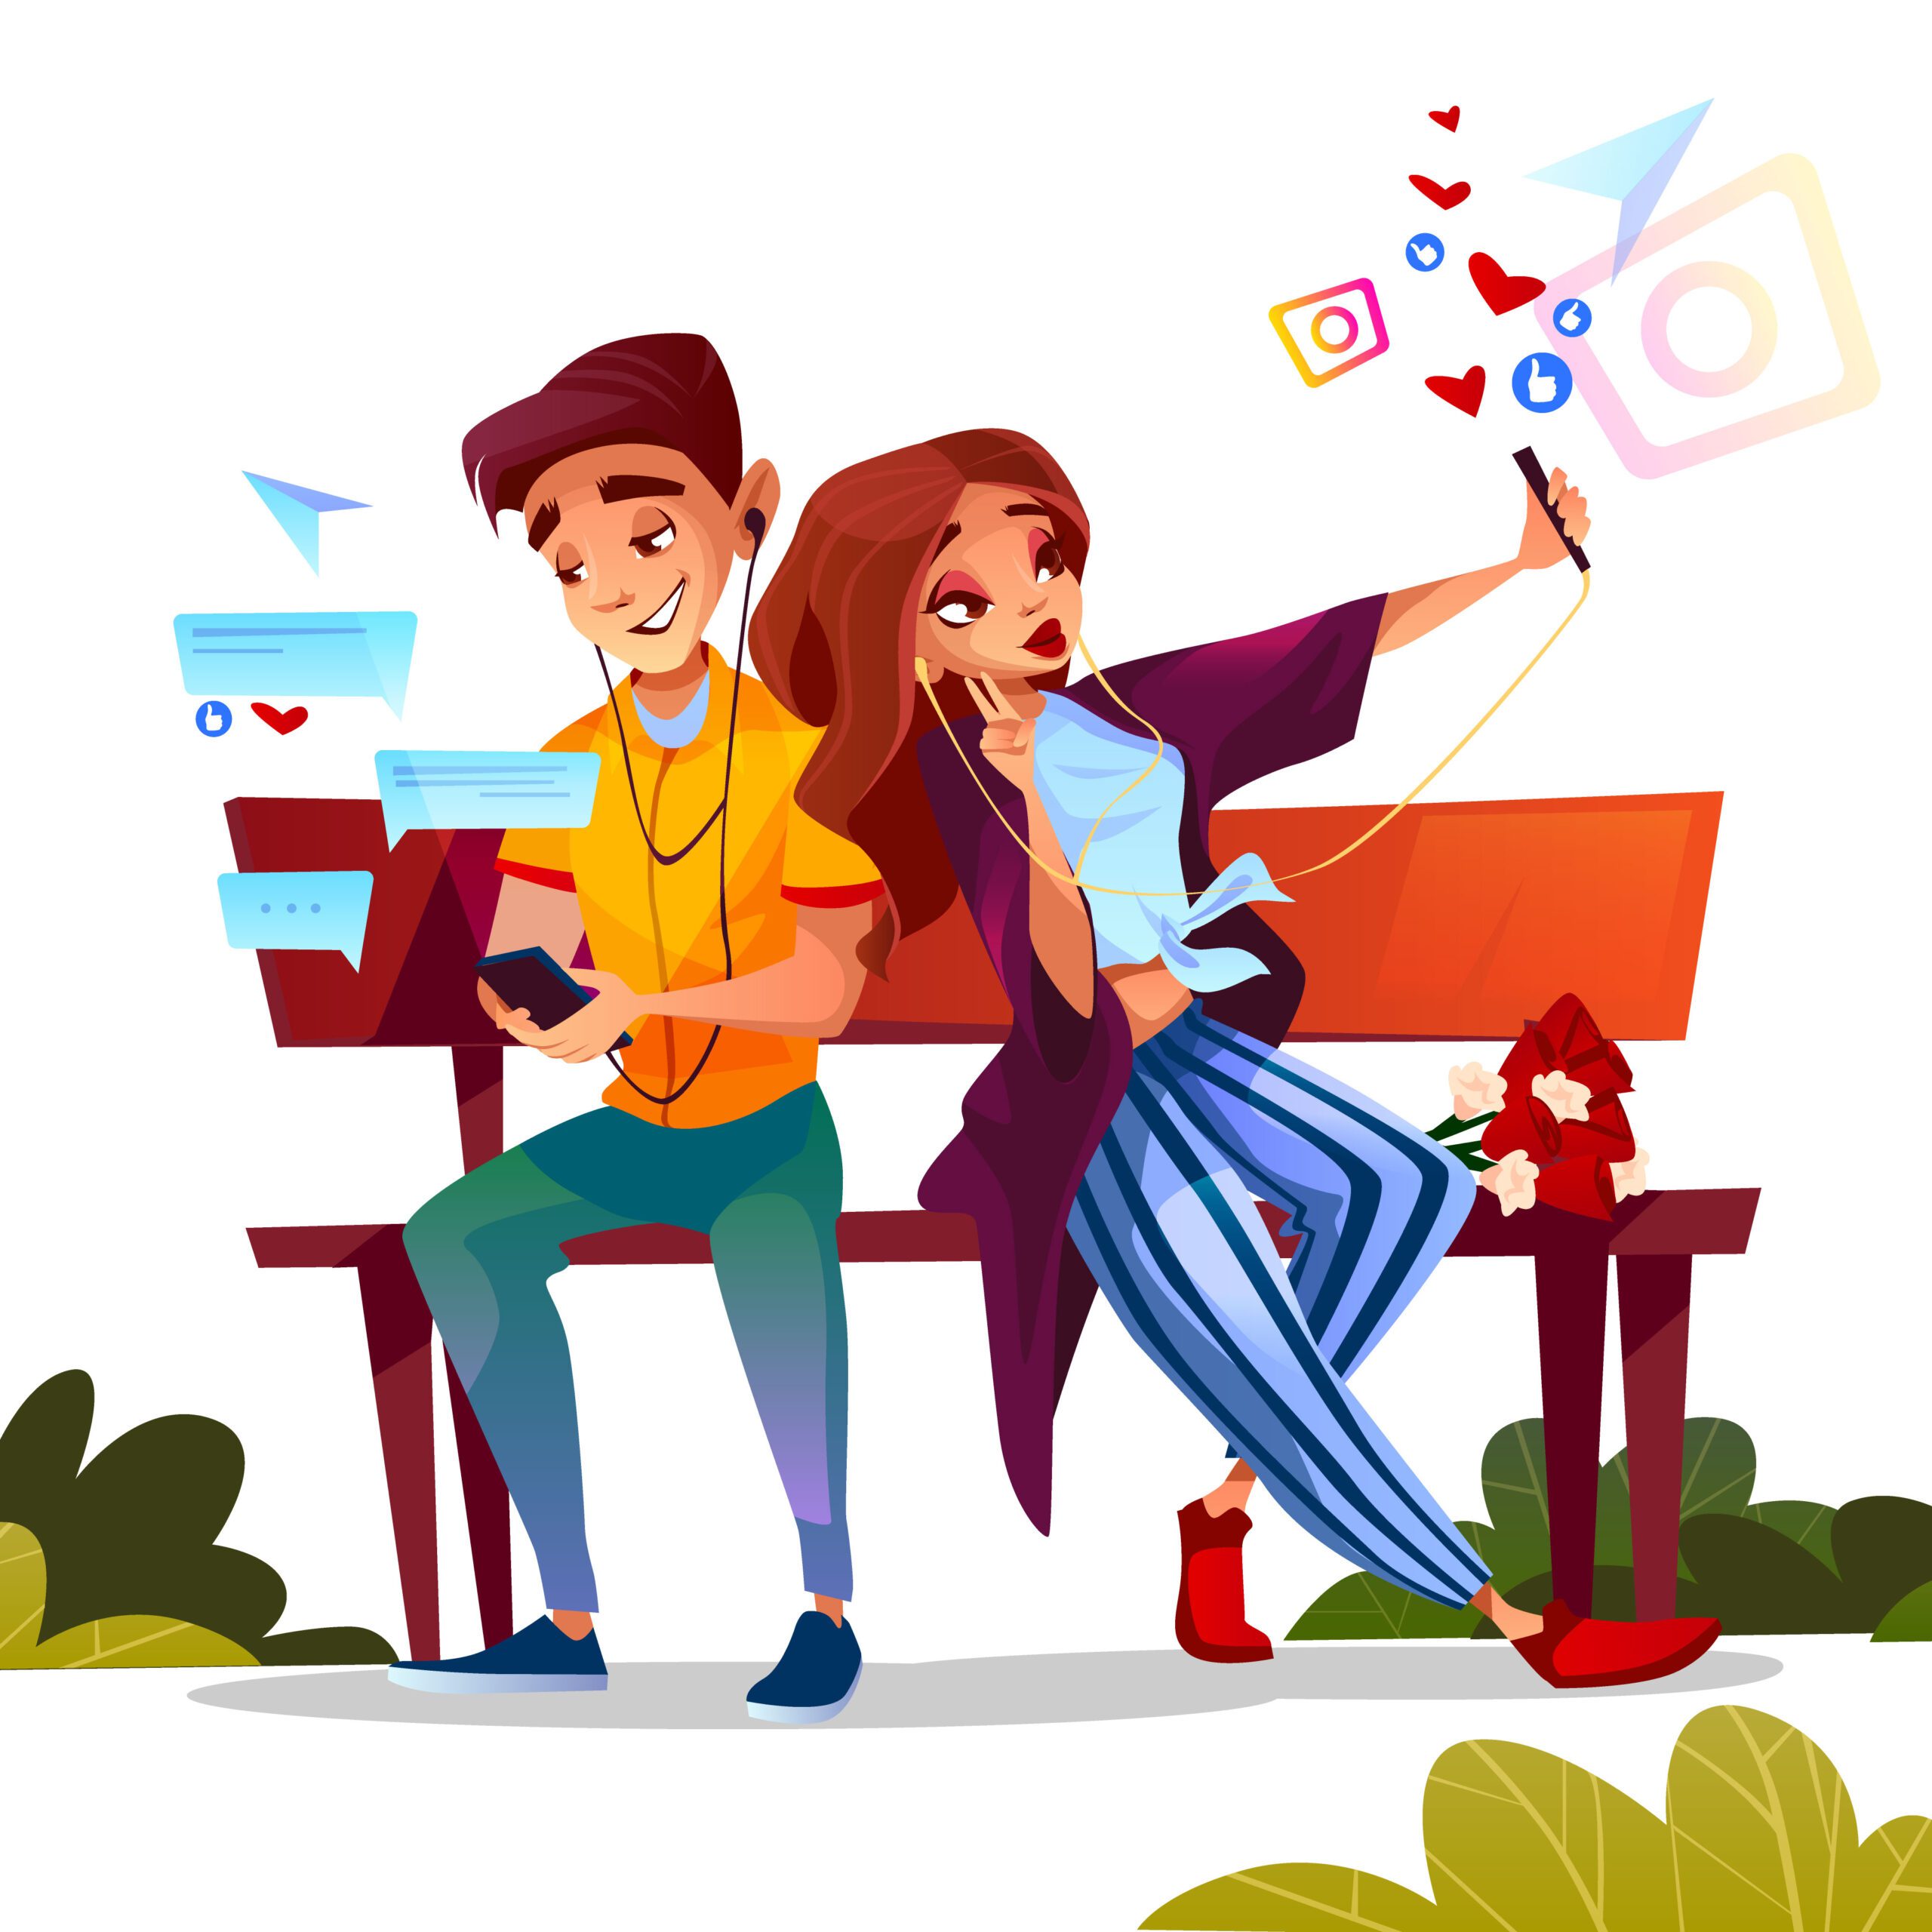 Navigating Social Media in Relationships: Finding Balance in the Digital Age